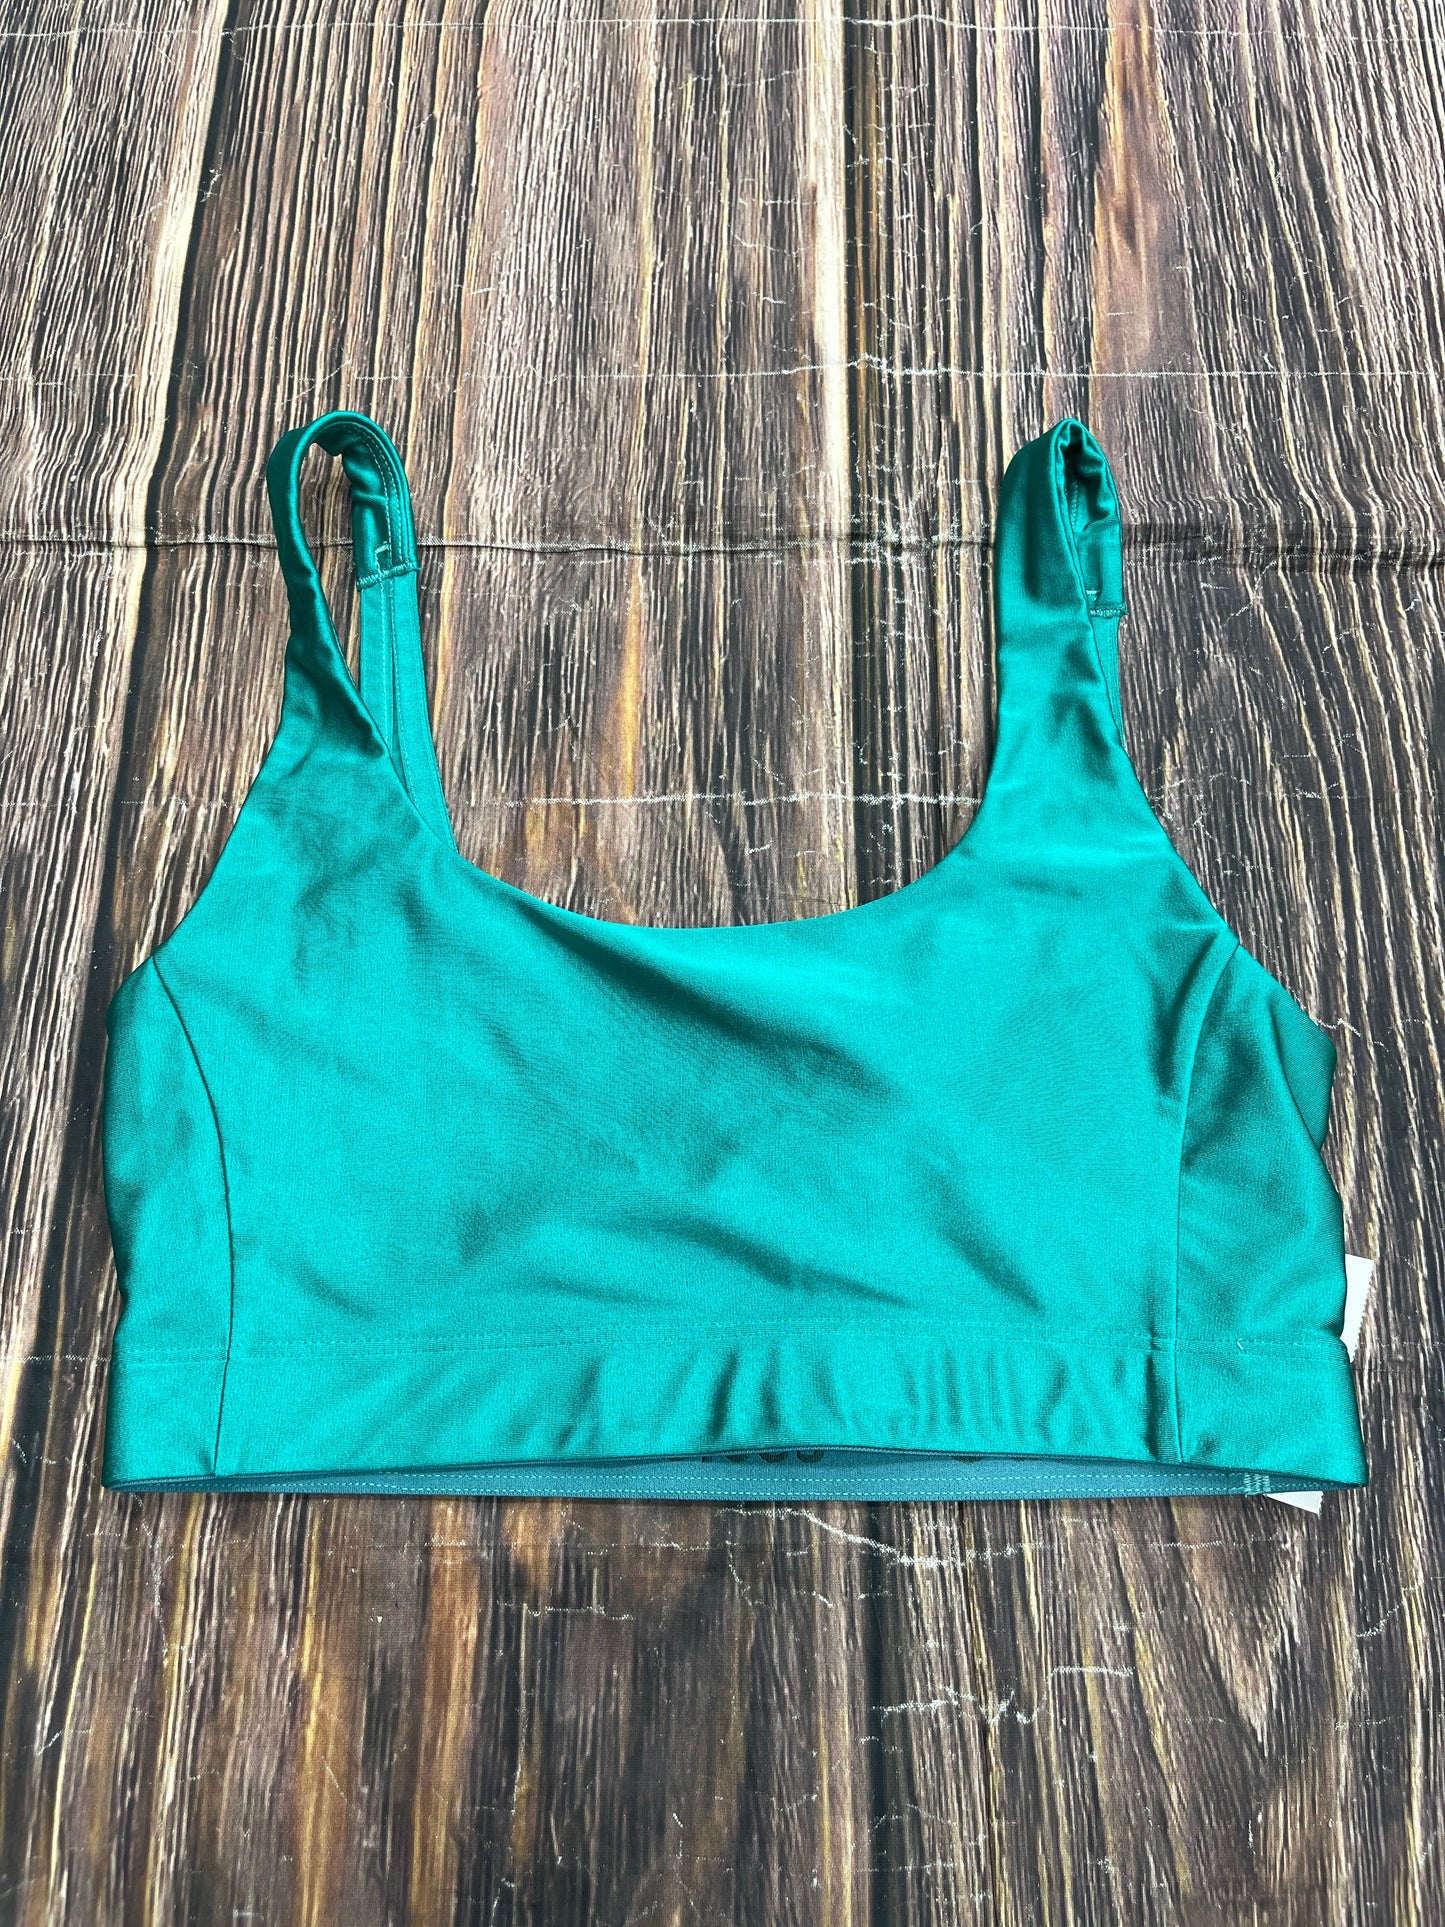 Athletic Bra By Outdoor Voices  Size: Xs